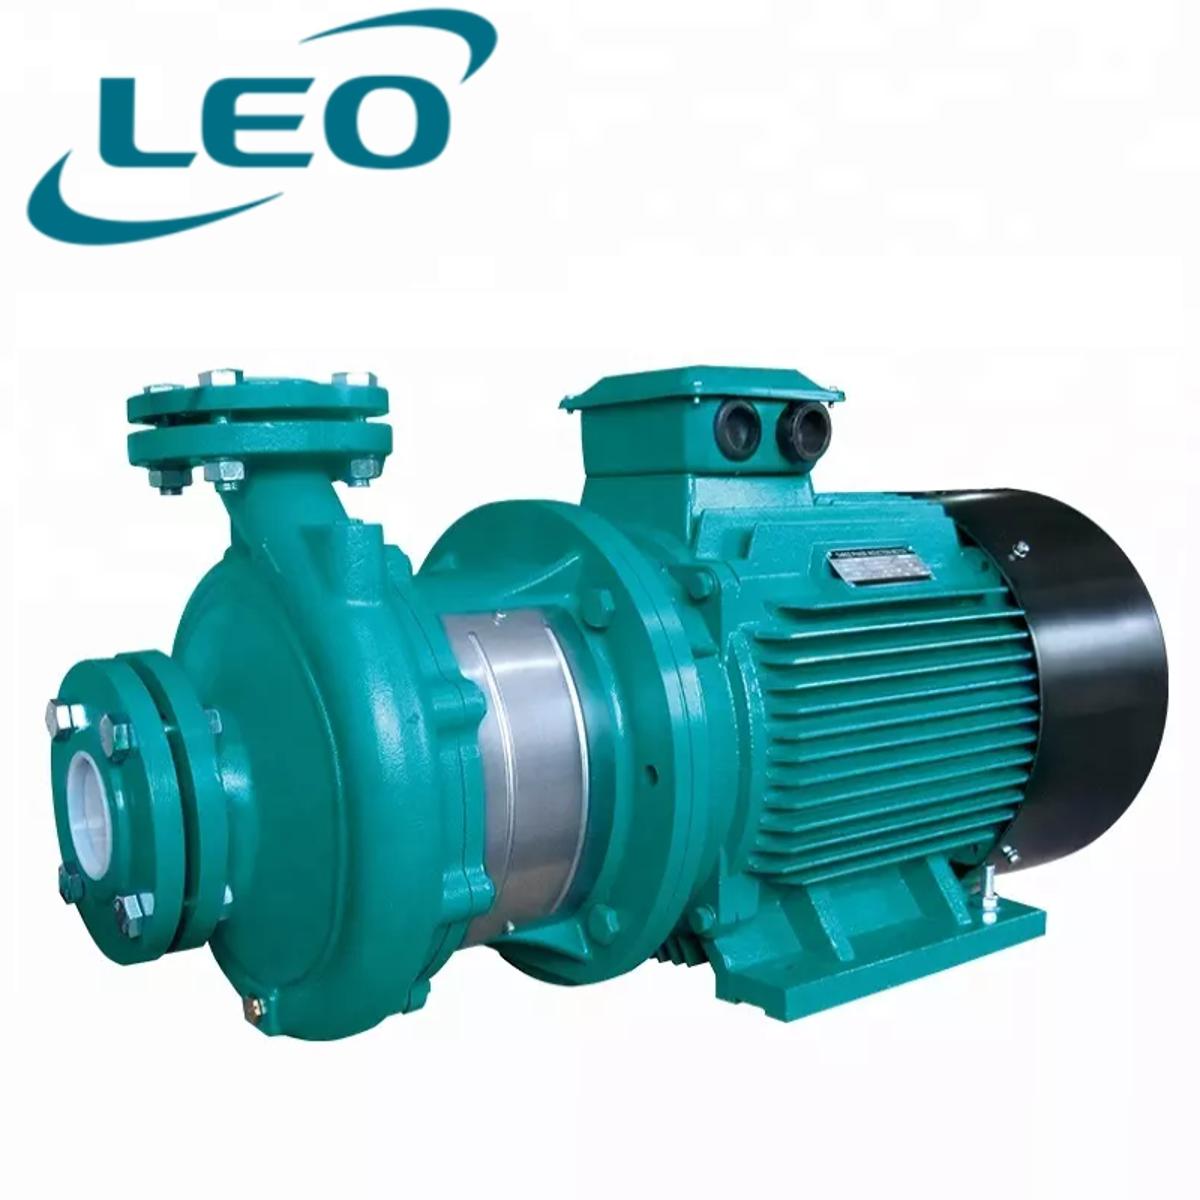 LEO - XST-50-250-150 - 15000 W - 20 HP - Clean Water HEAVY DUTY Centrifugal Pump With FLANGES  - 380V~400V THREE PHASE - SIZE :- 2 1-2" x 2 " - European STANDARD